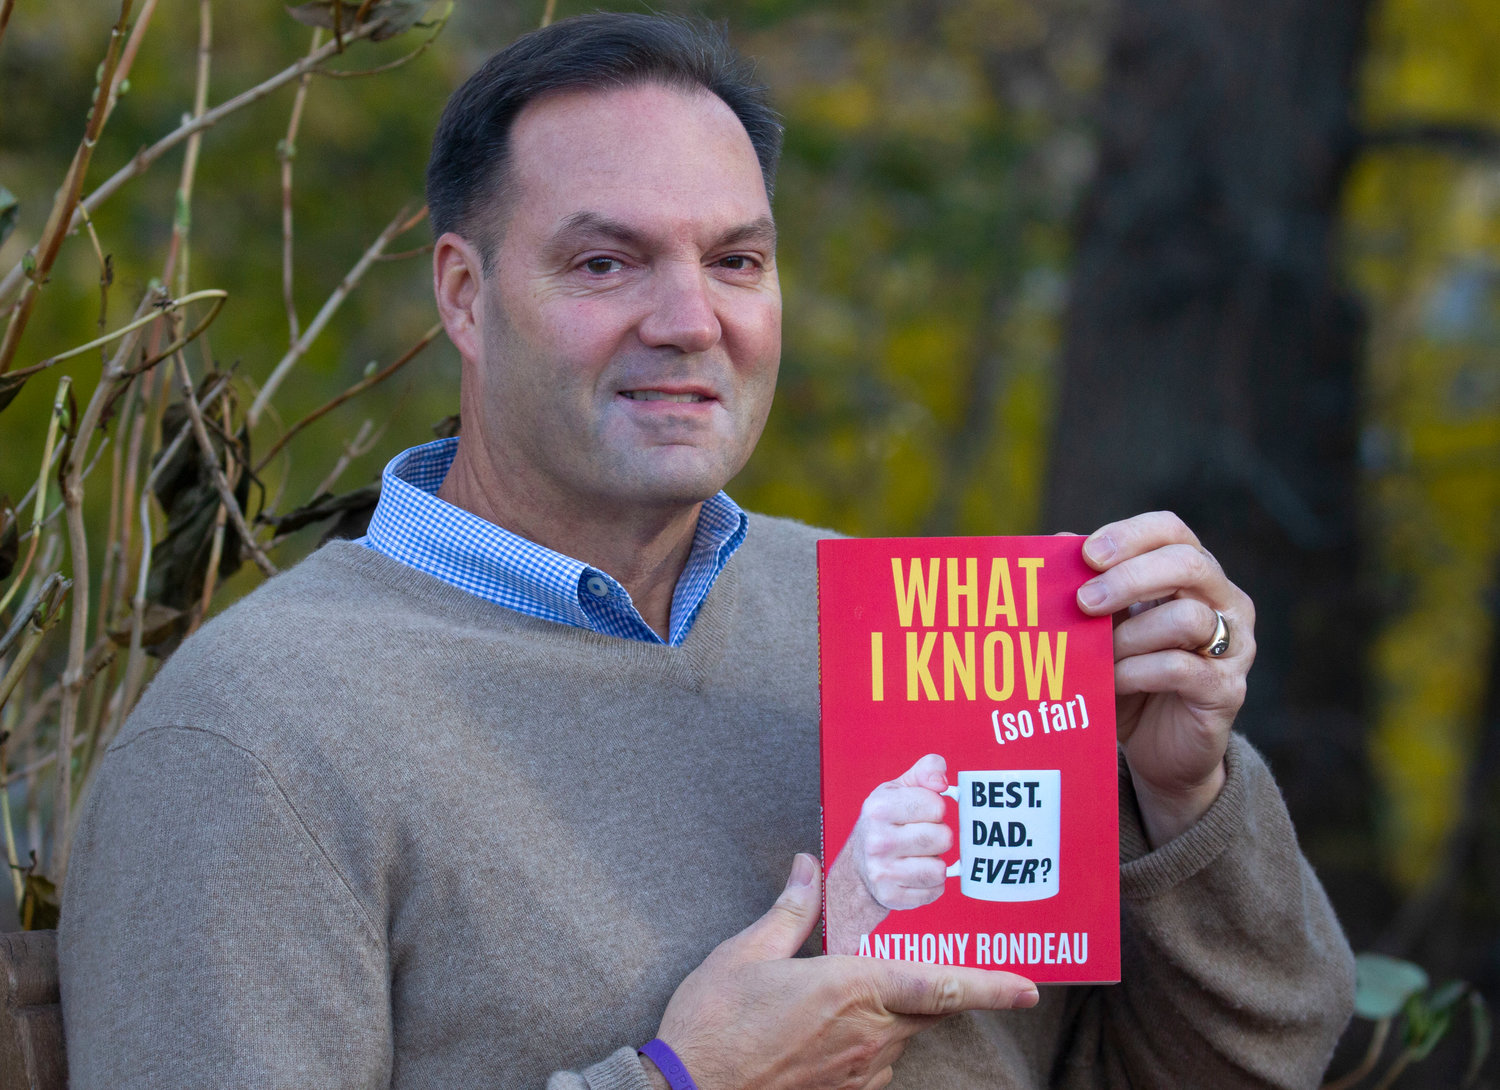 Barrington resident Anthony Rondeau recently wrote his first book, “What I Know (so far).”